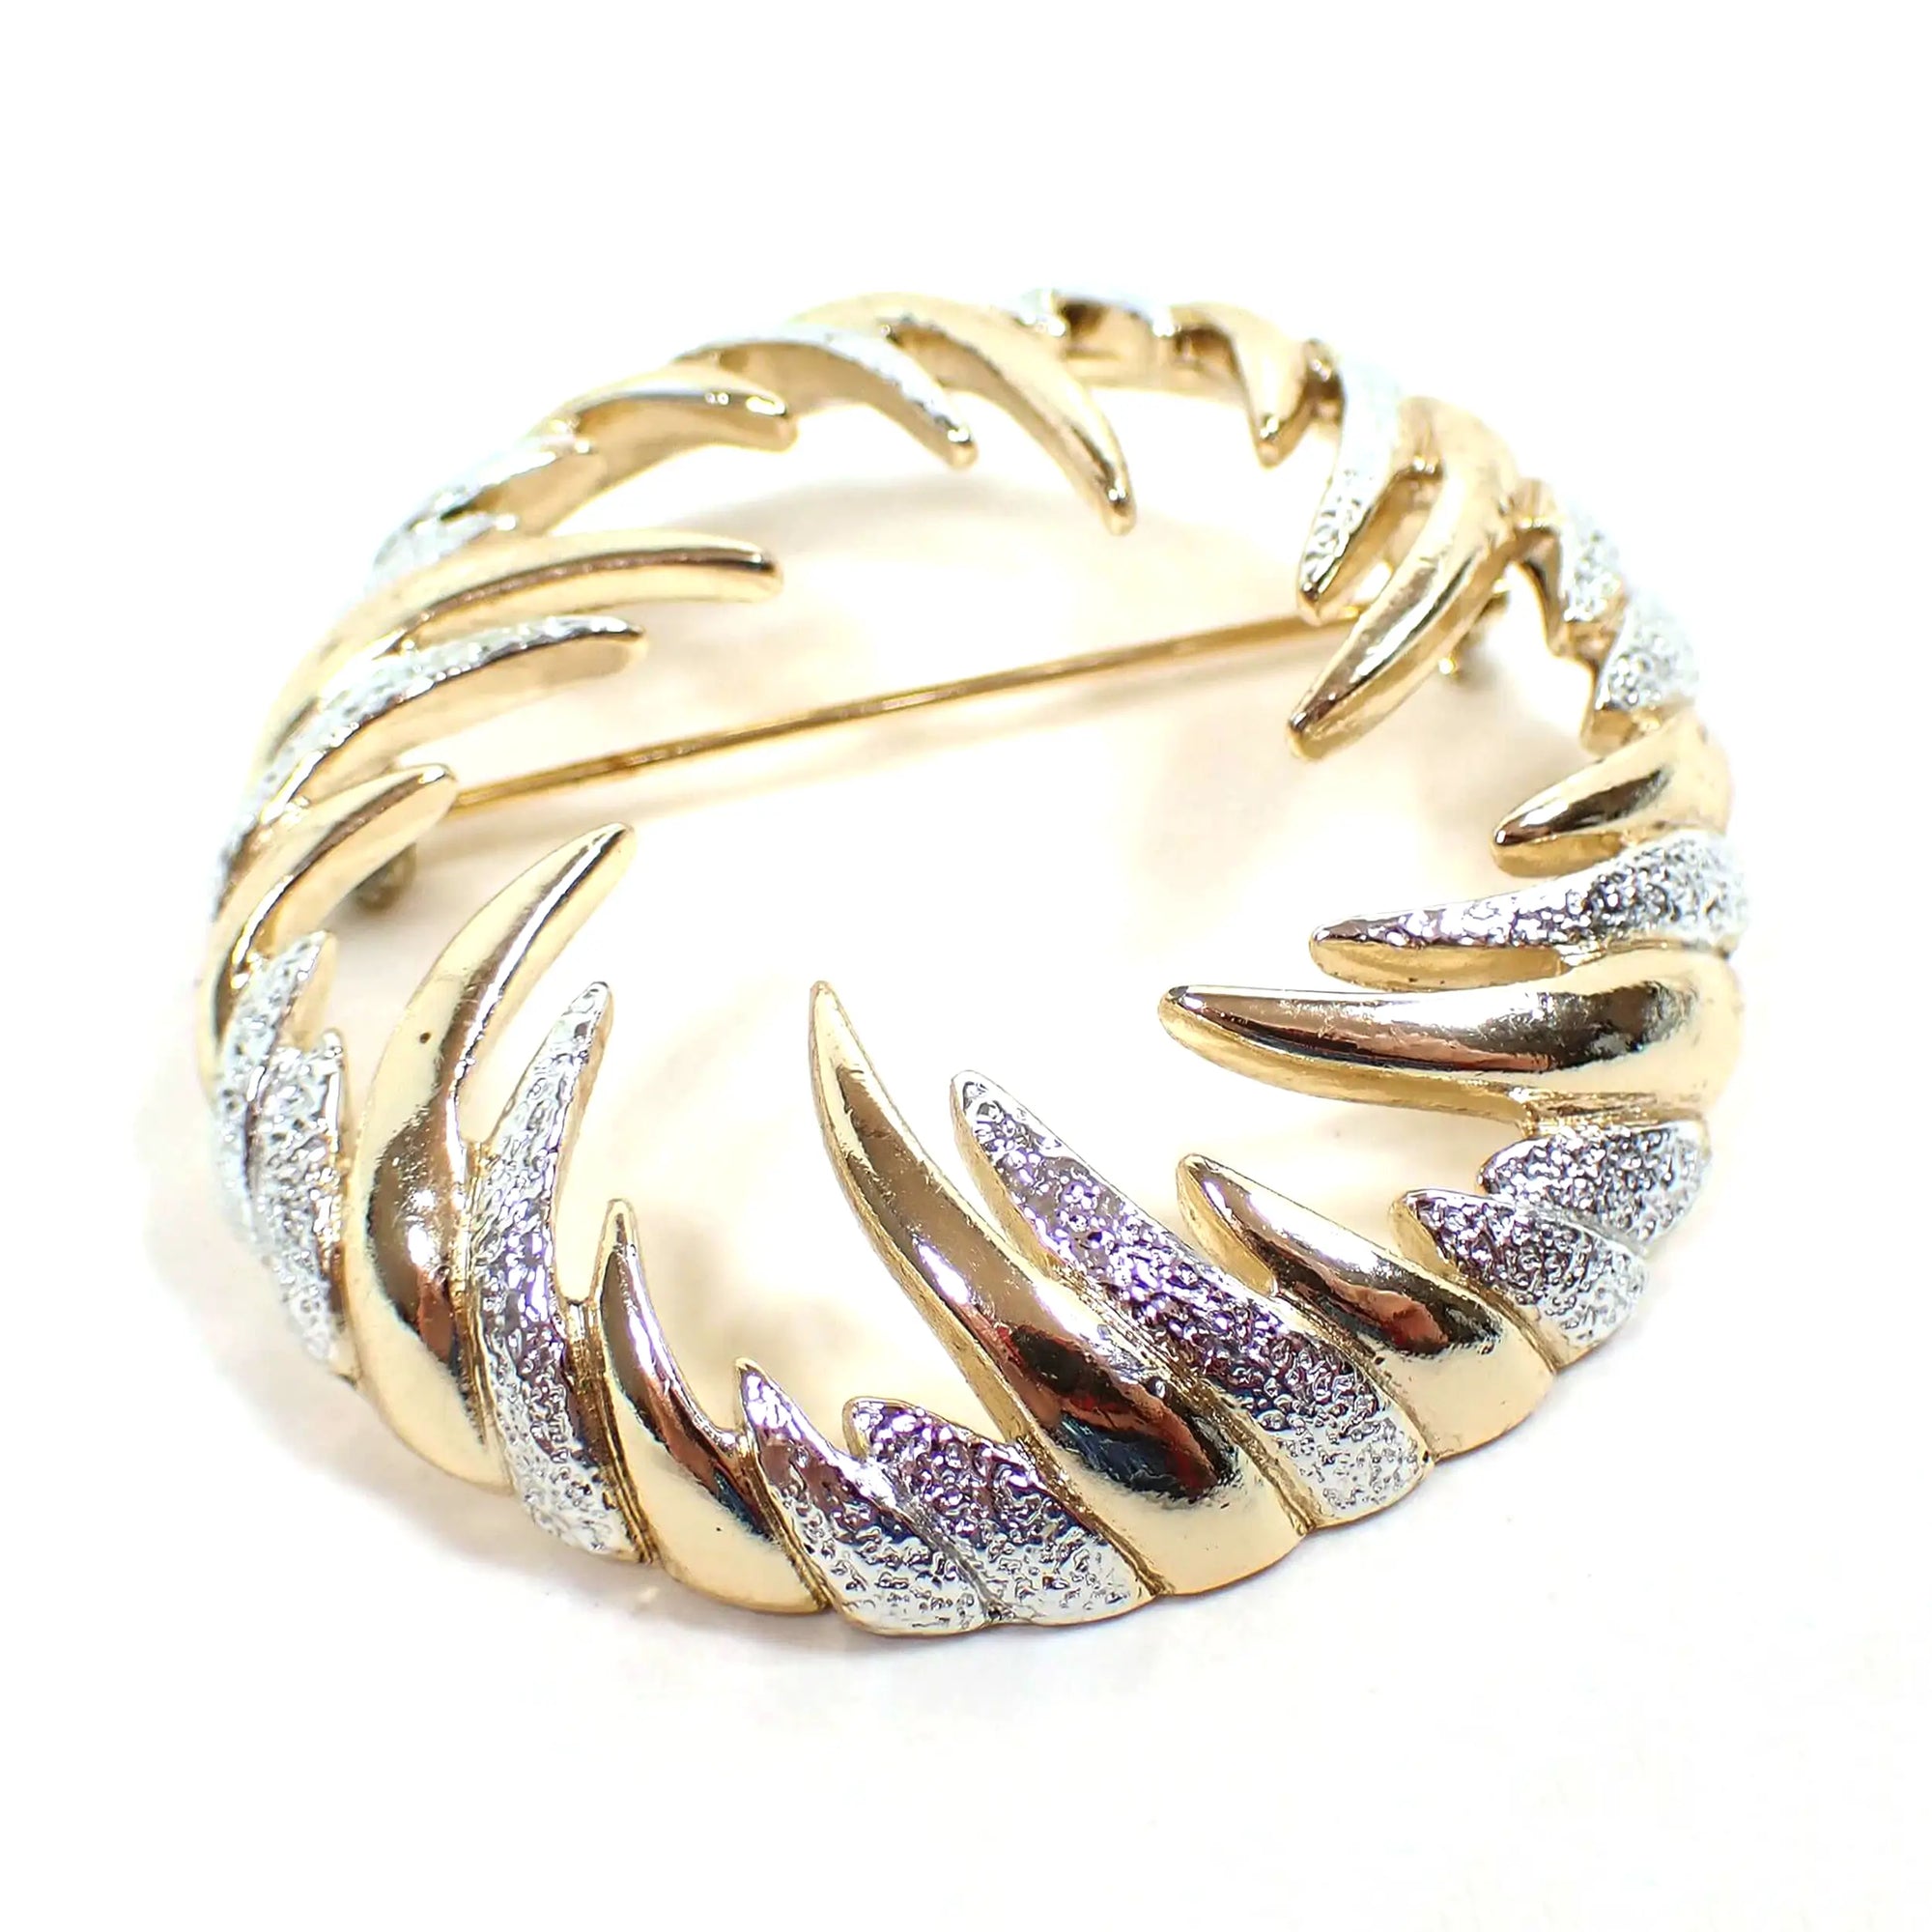 Front view of the retro vintage Sarah Coventry brooch pin. It is round in shape with an open middle. The is a curved spike like design going inward all the way around the brooch. The colors rotate between shiny gold tone plated and textured matte silver tone plated color.